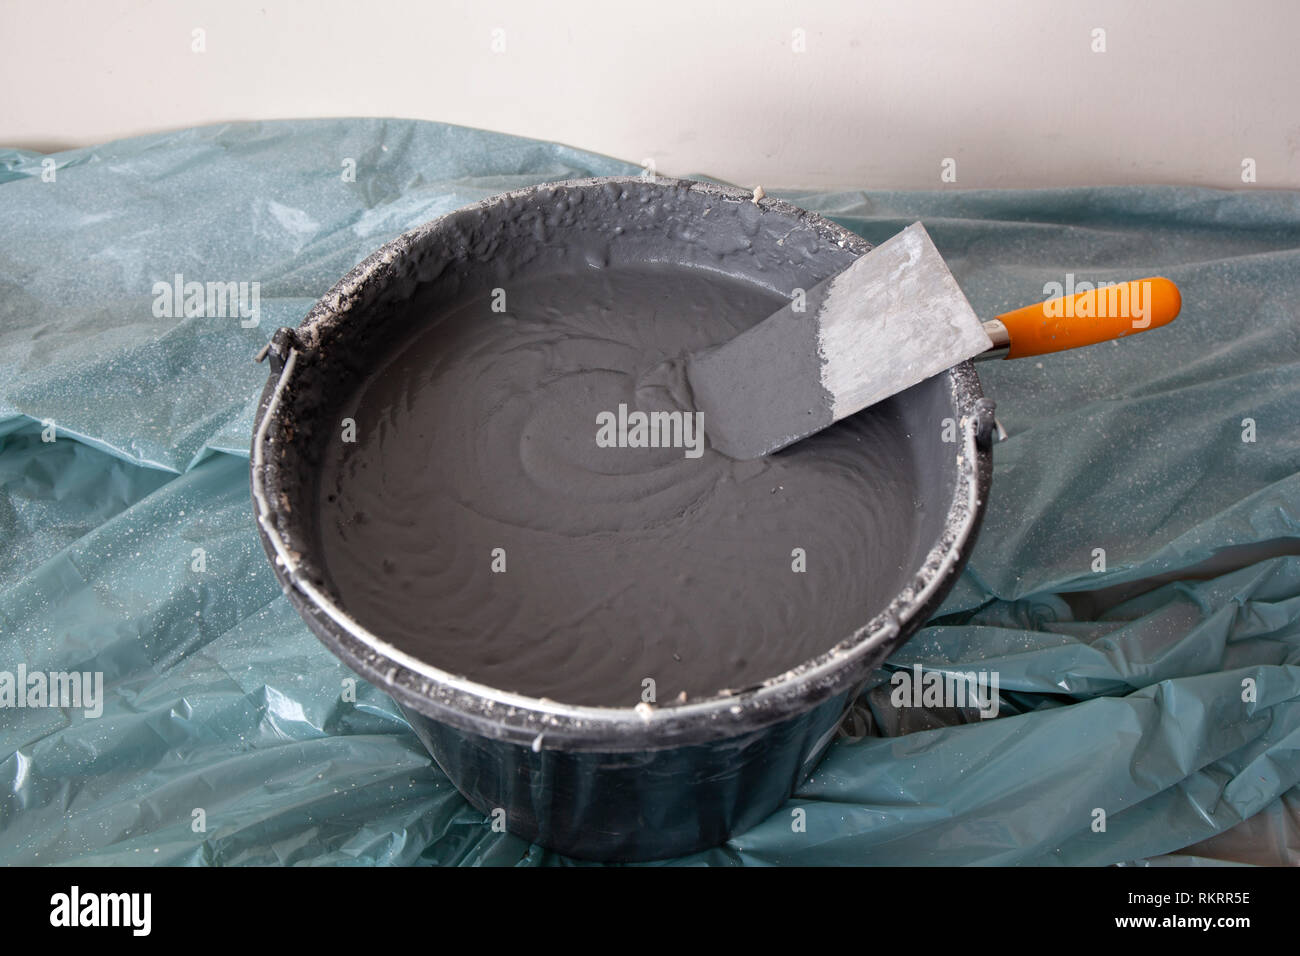 Decorative cement plaster and a trowel in a construction bucket ready for plastering Stock Photo